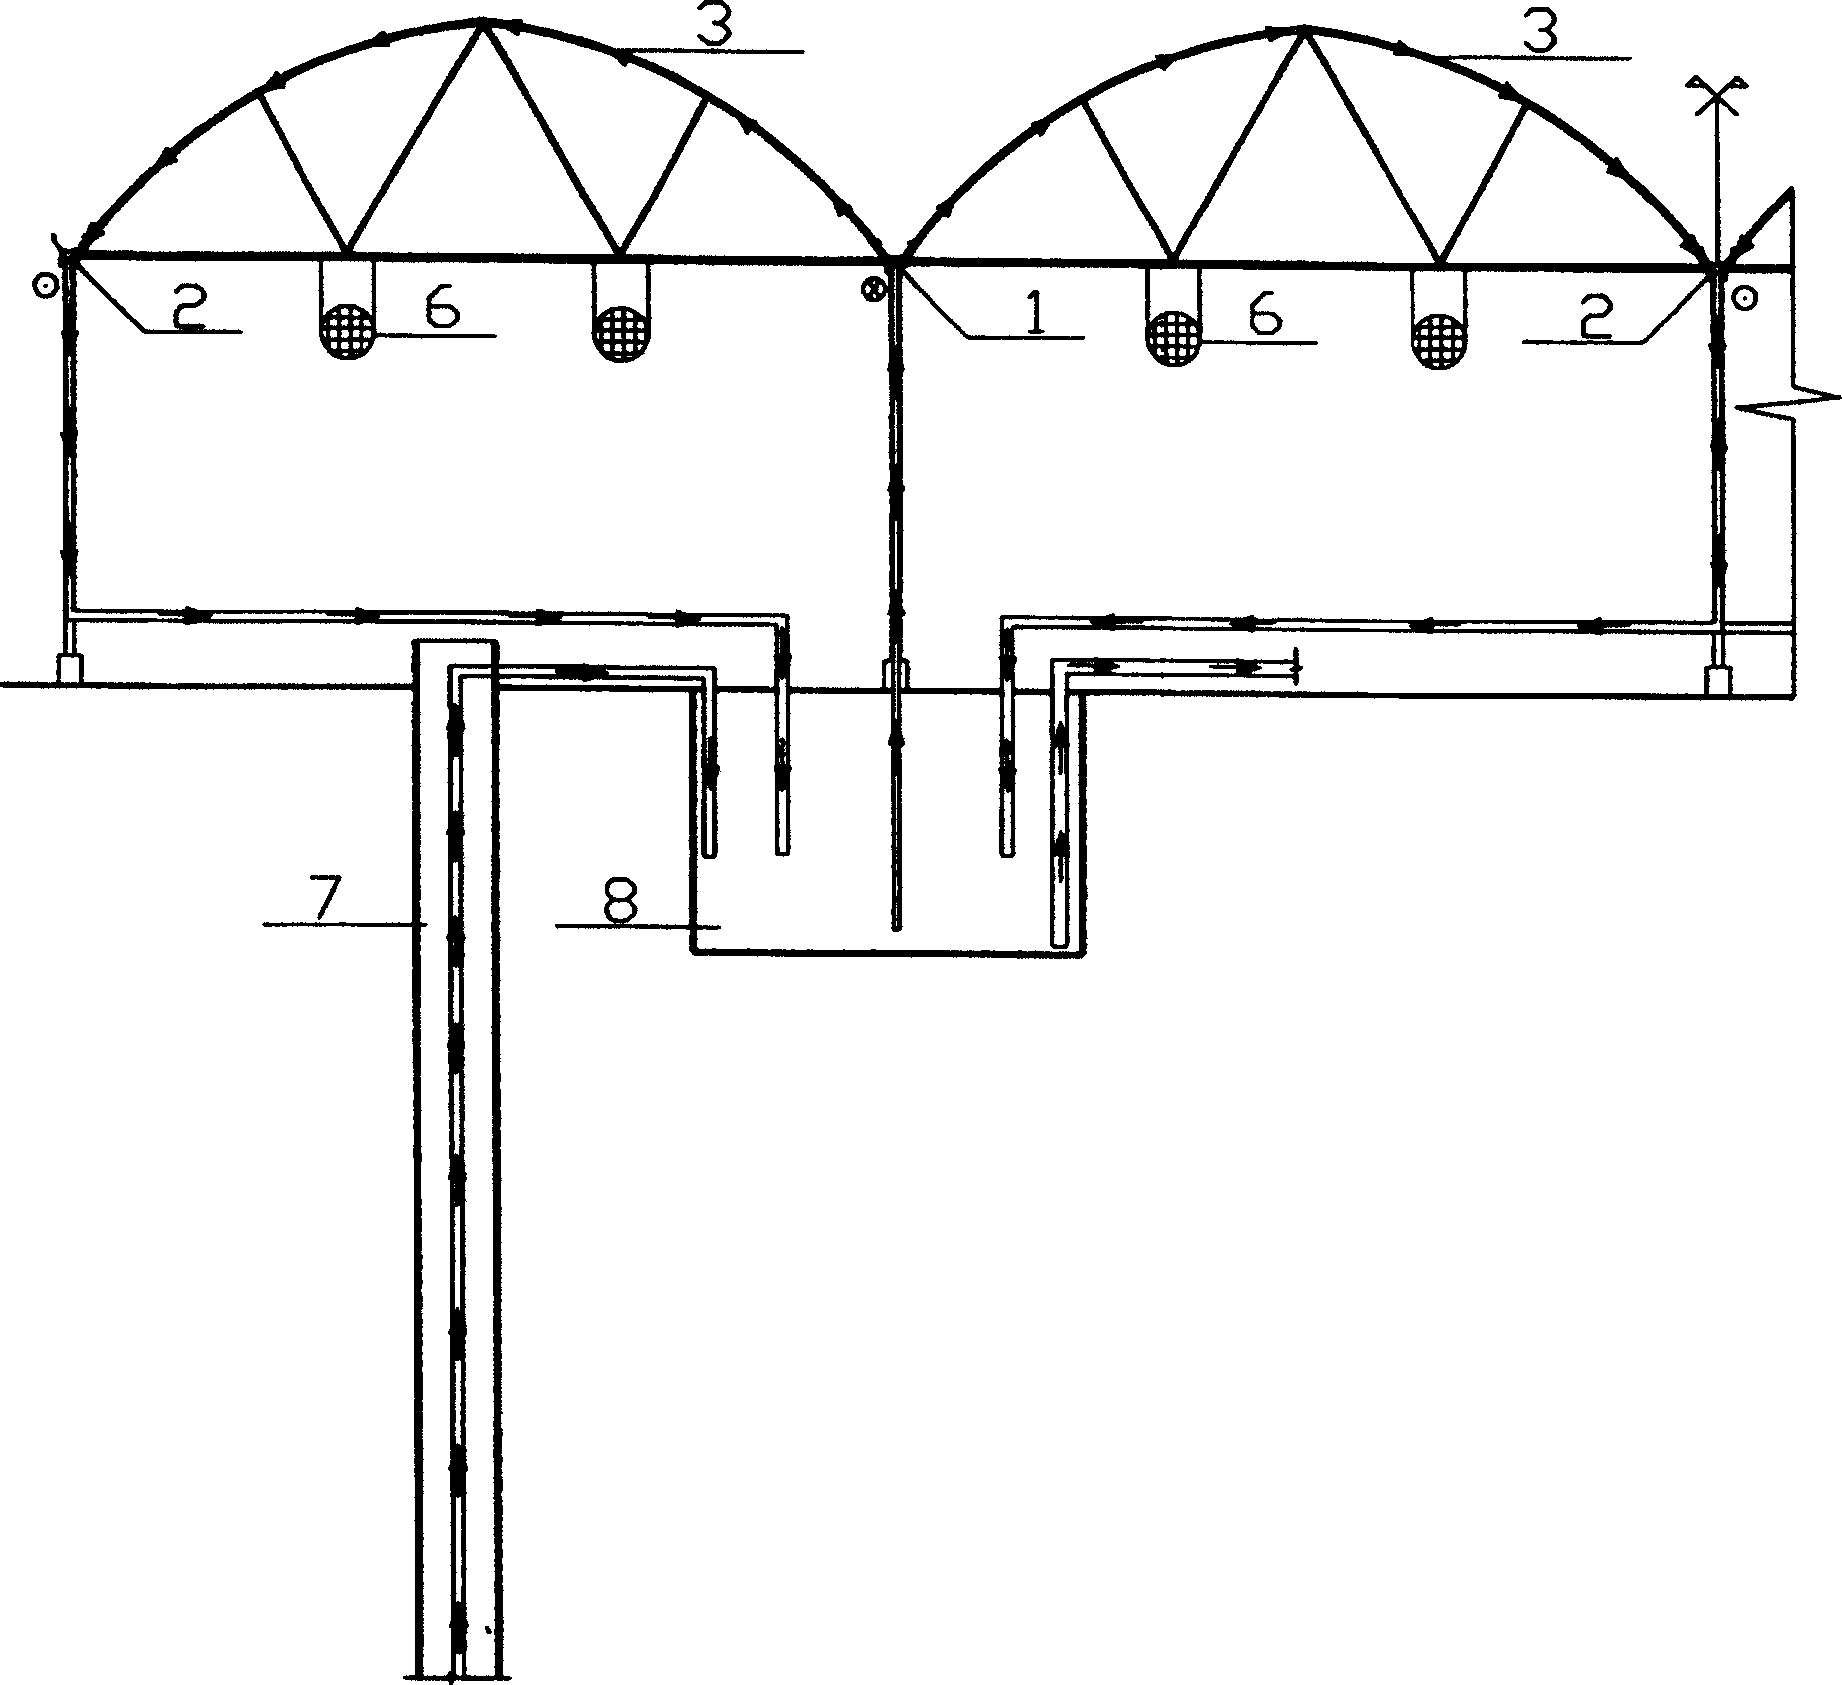 Pipeline temp-lowering system using circulating underground water for joint greenhouses